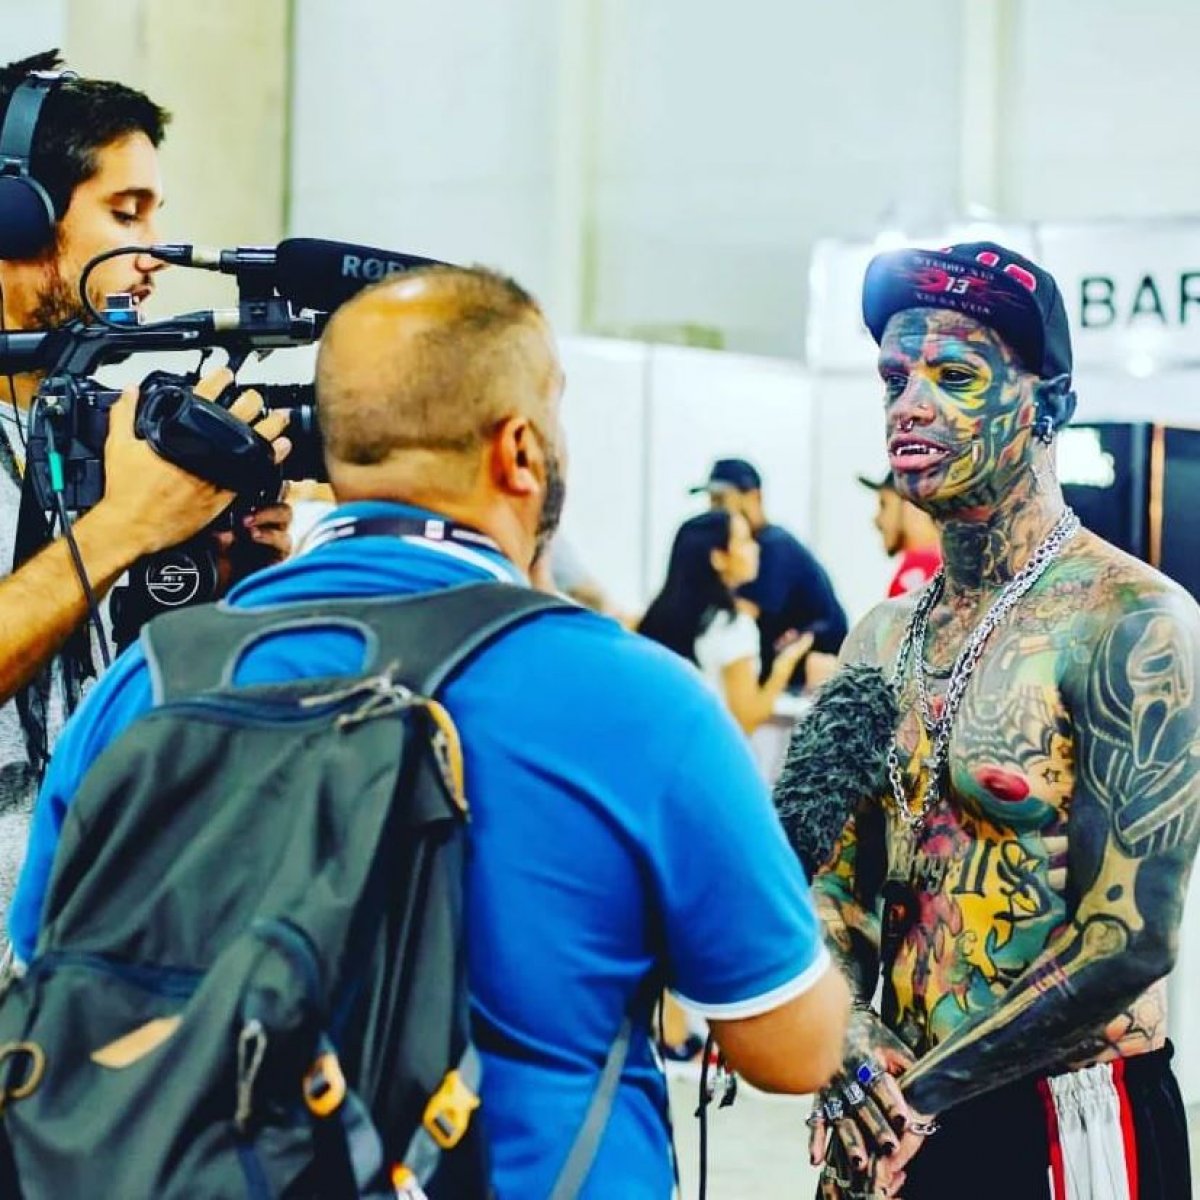 Artist whose body is covered with tattoos in Brazil draws attention #1